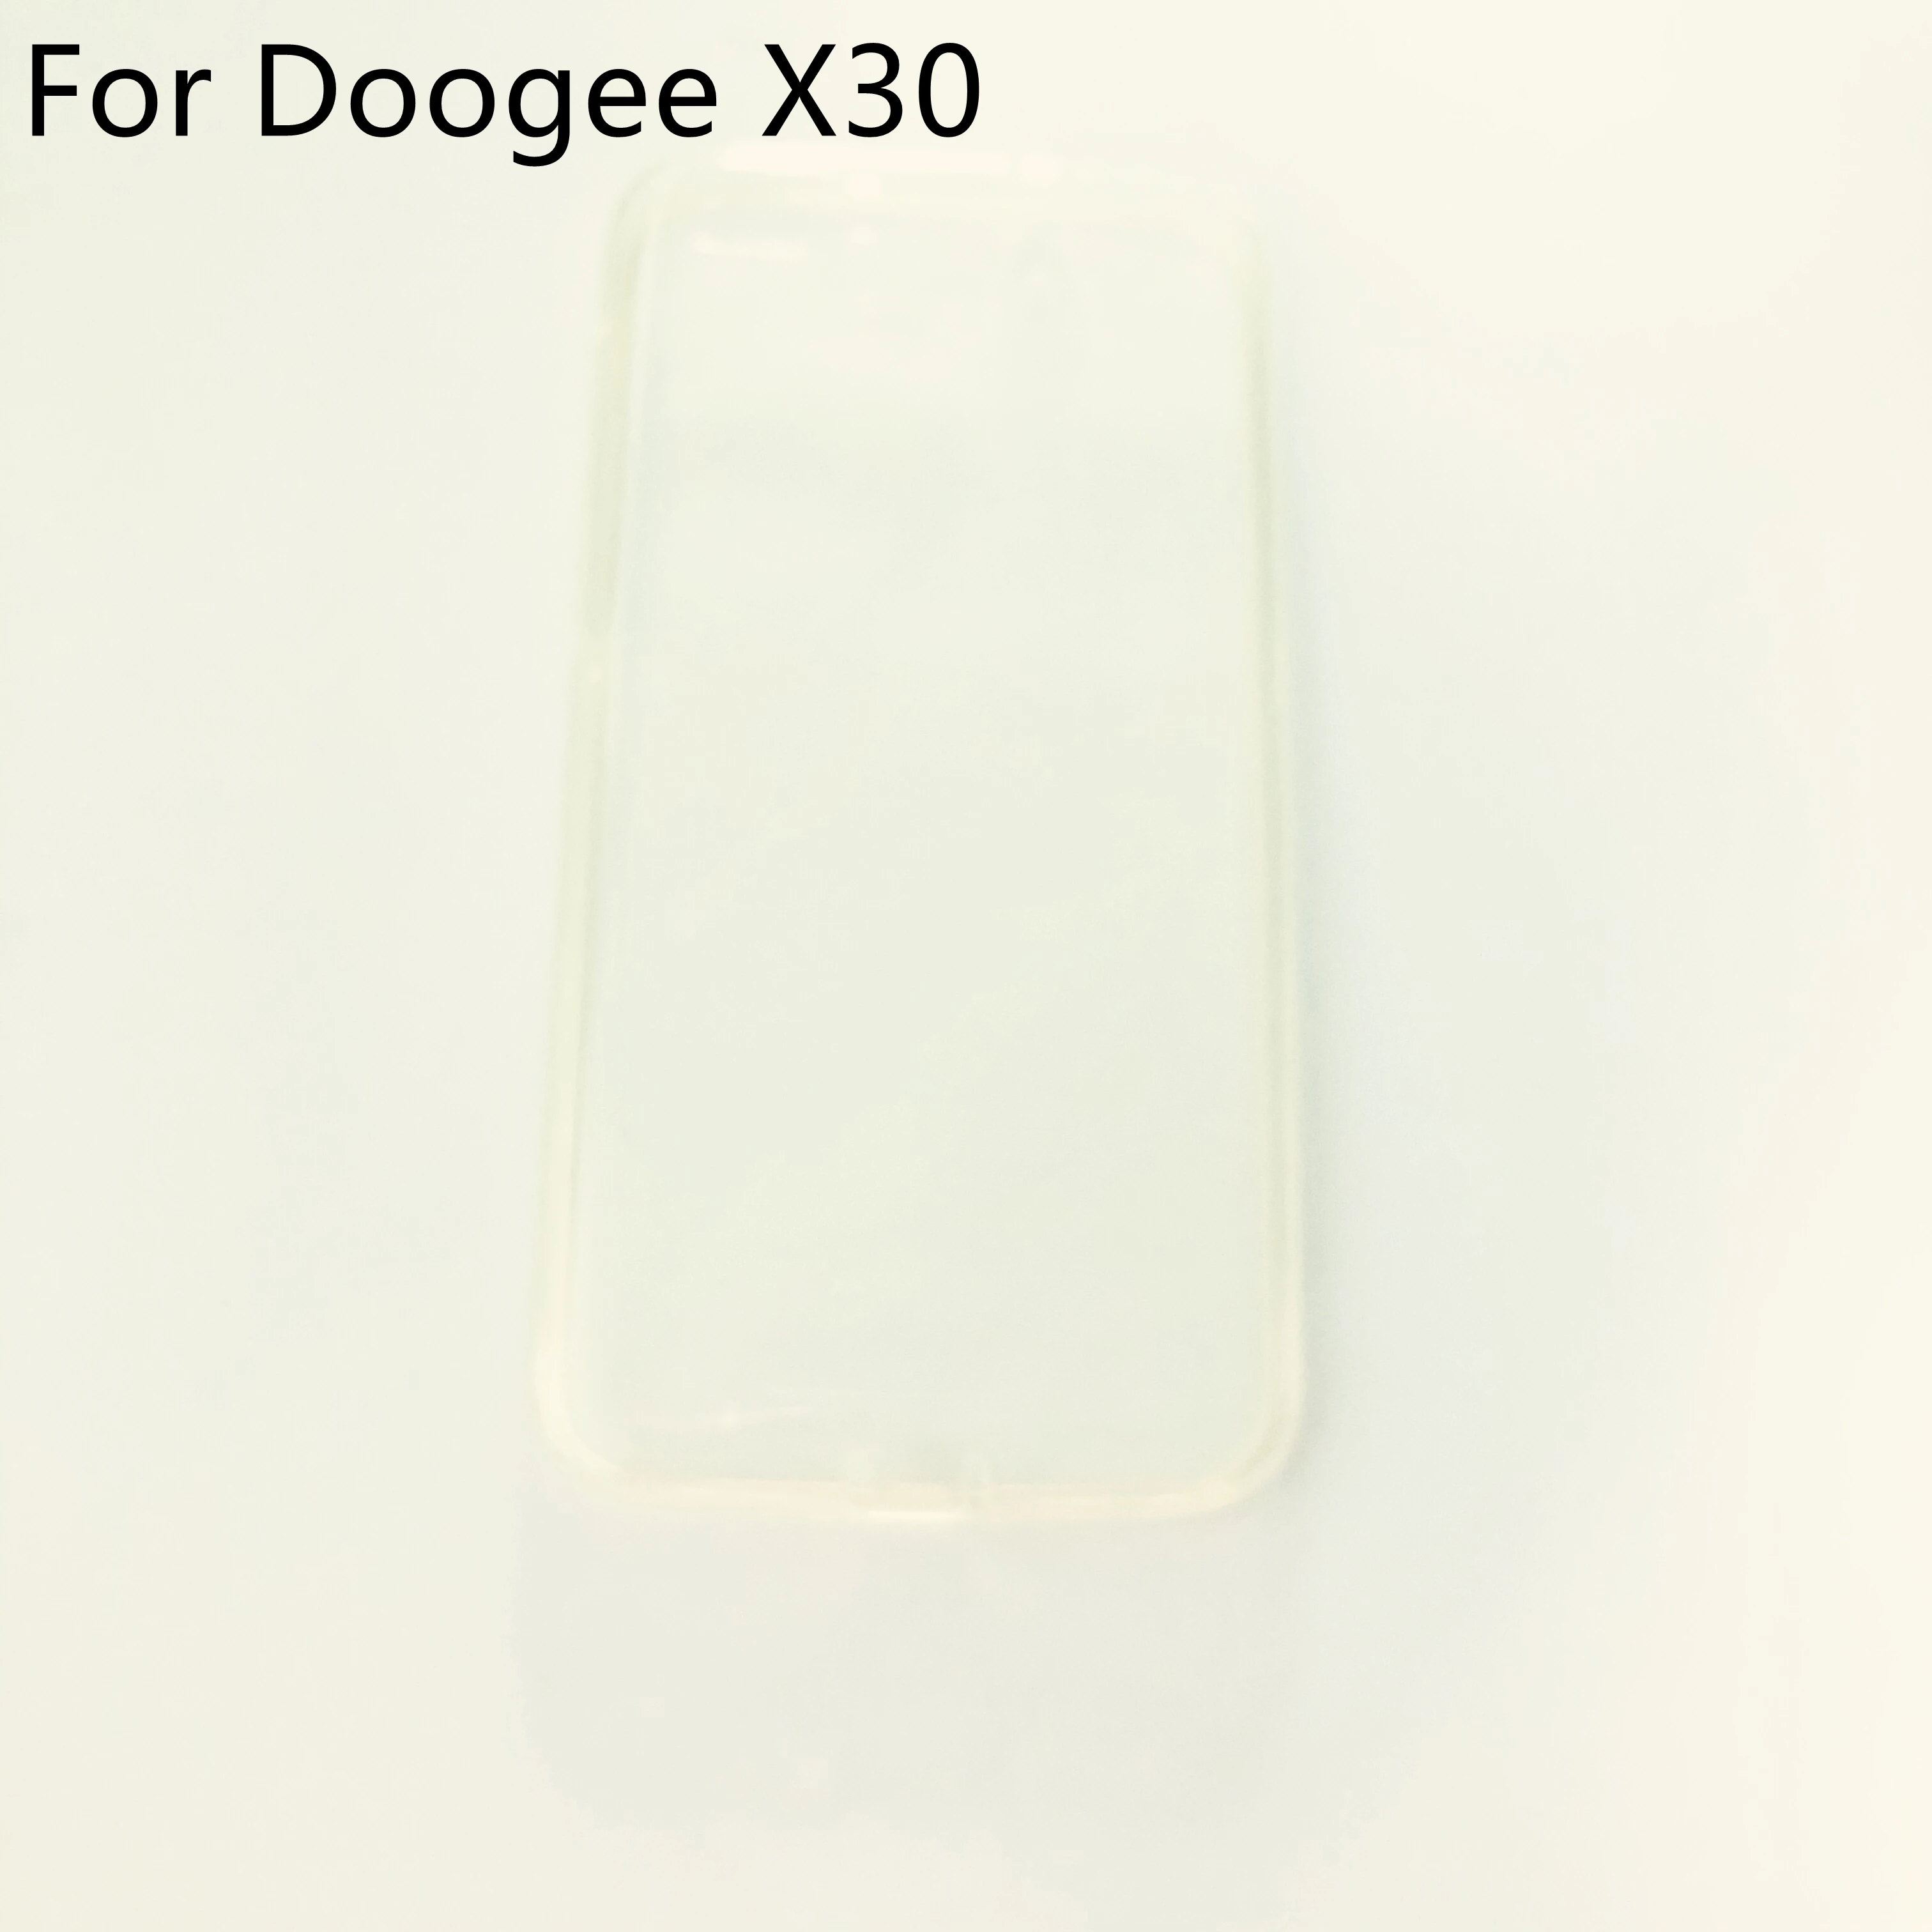 

DOOGEE X30 New TPU Silicon Case Clear Soft Case For DOOGEE X30 MTK6580A Quad Core 5.5'' 1280x720 Smartphone